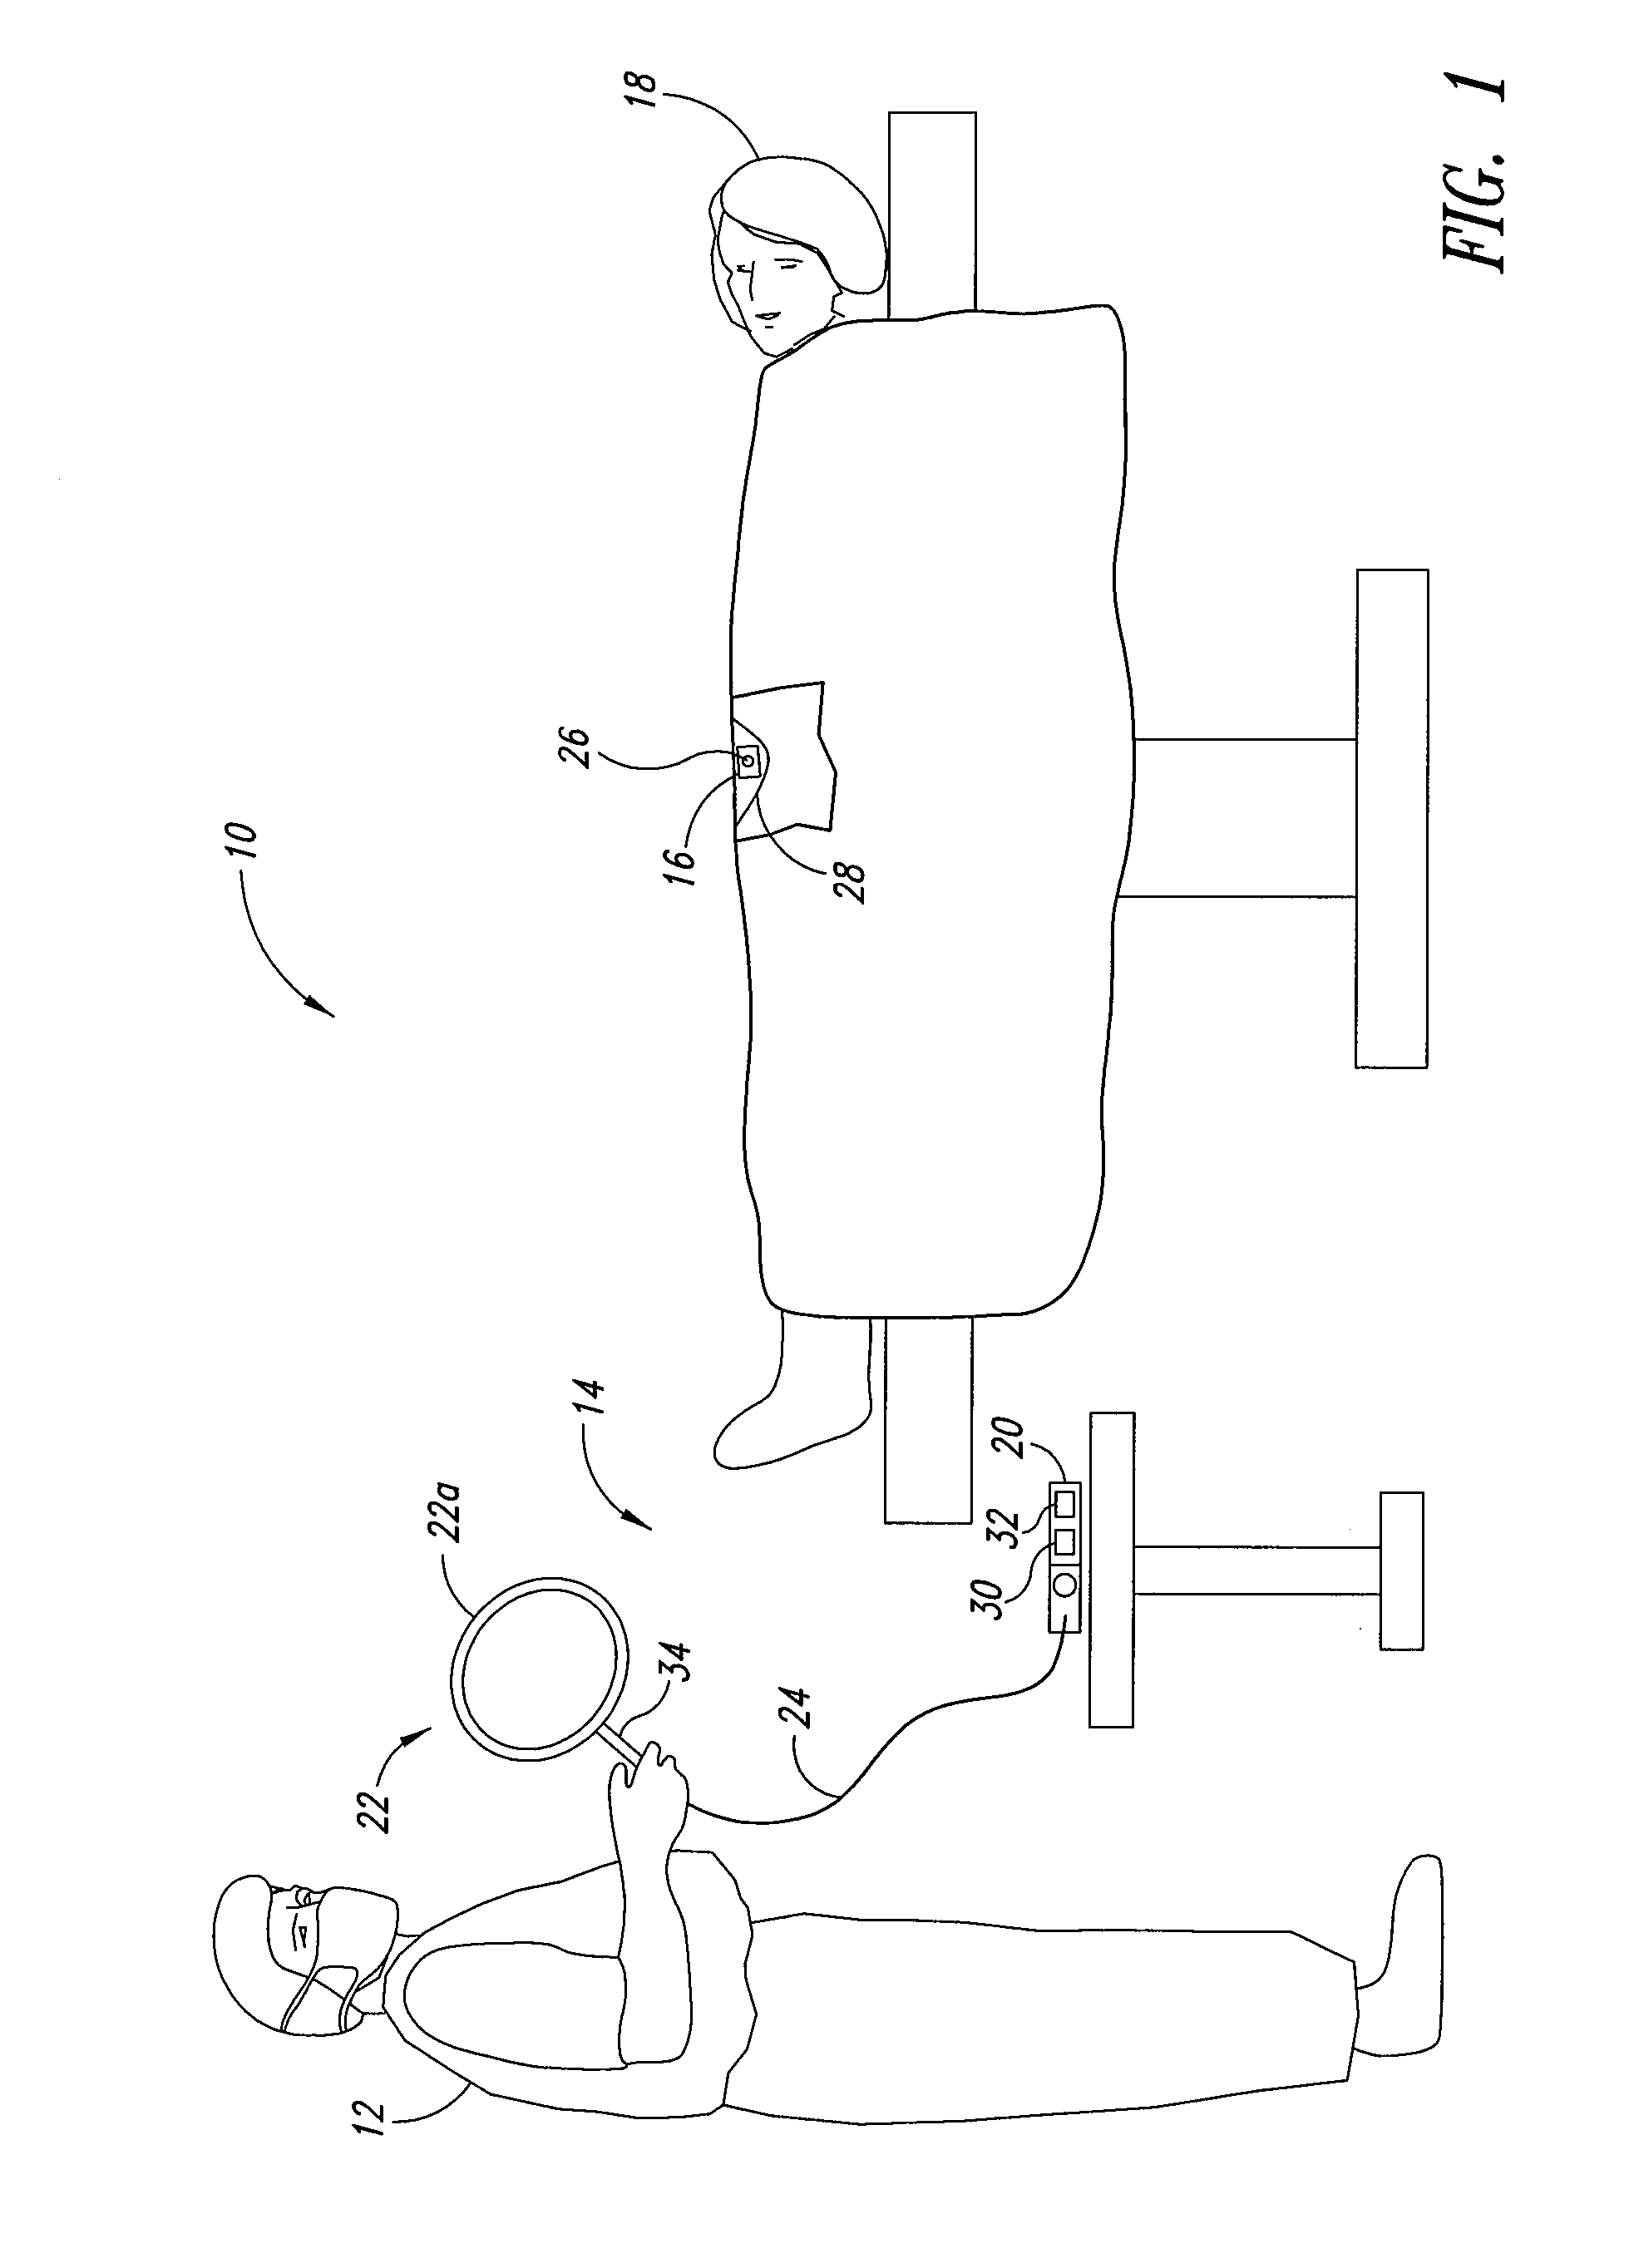 Method, apparatus and article for detection of transponder tagged objects, for example during surgery